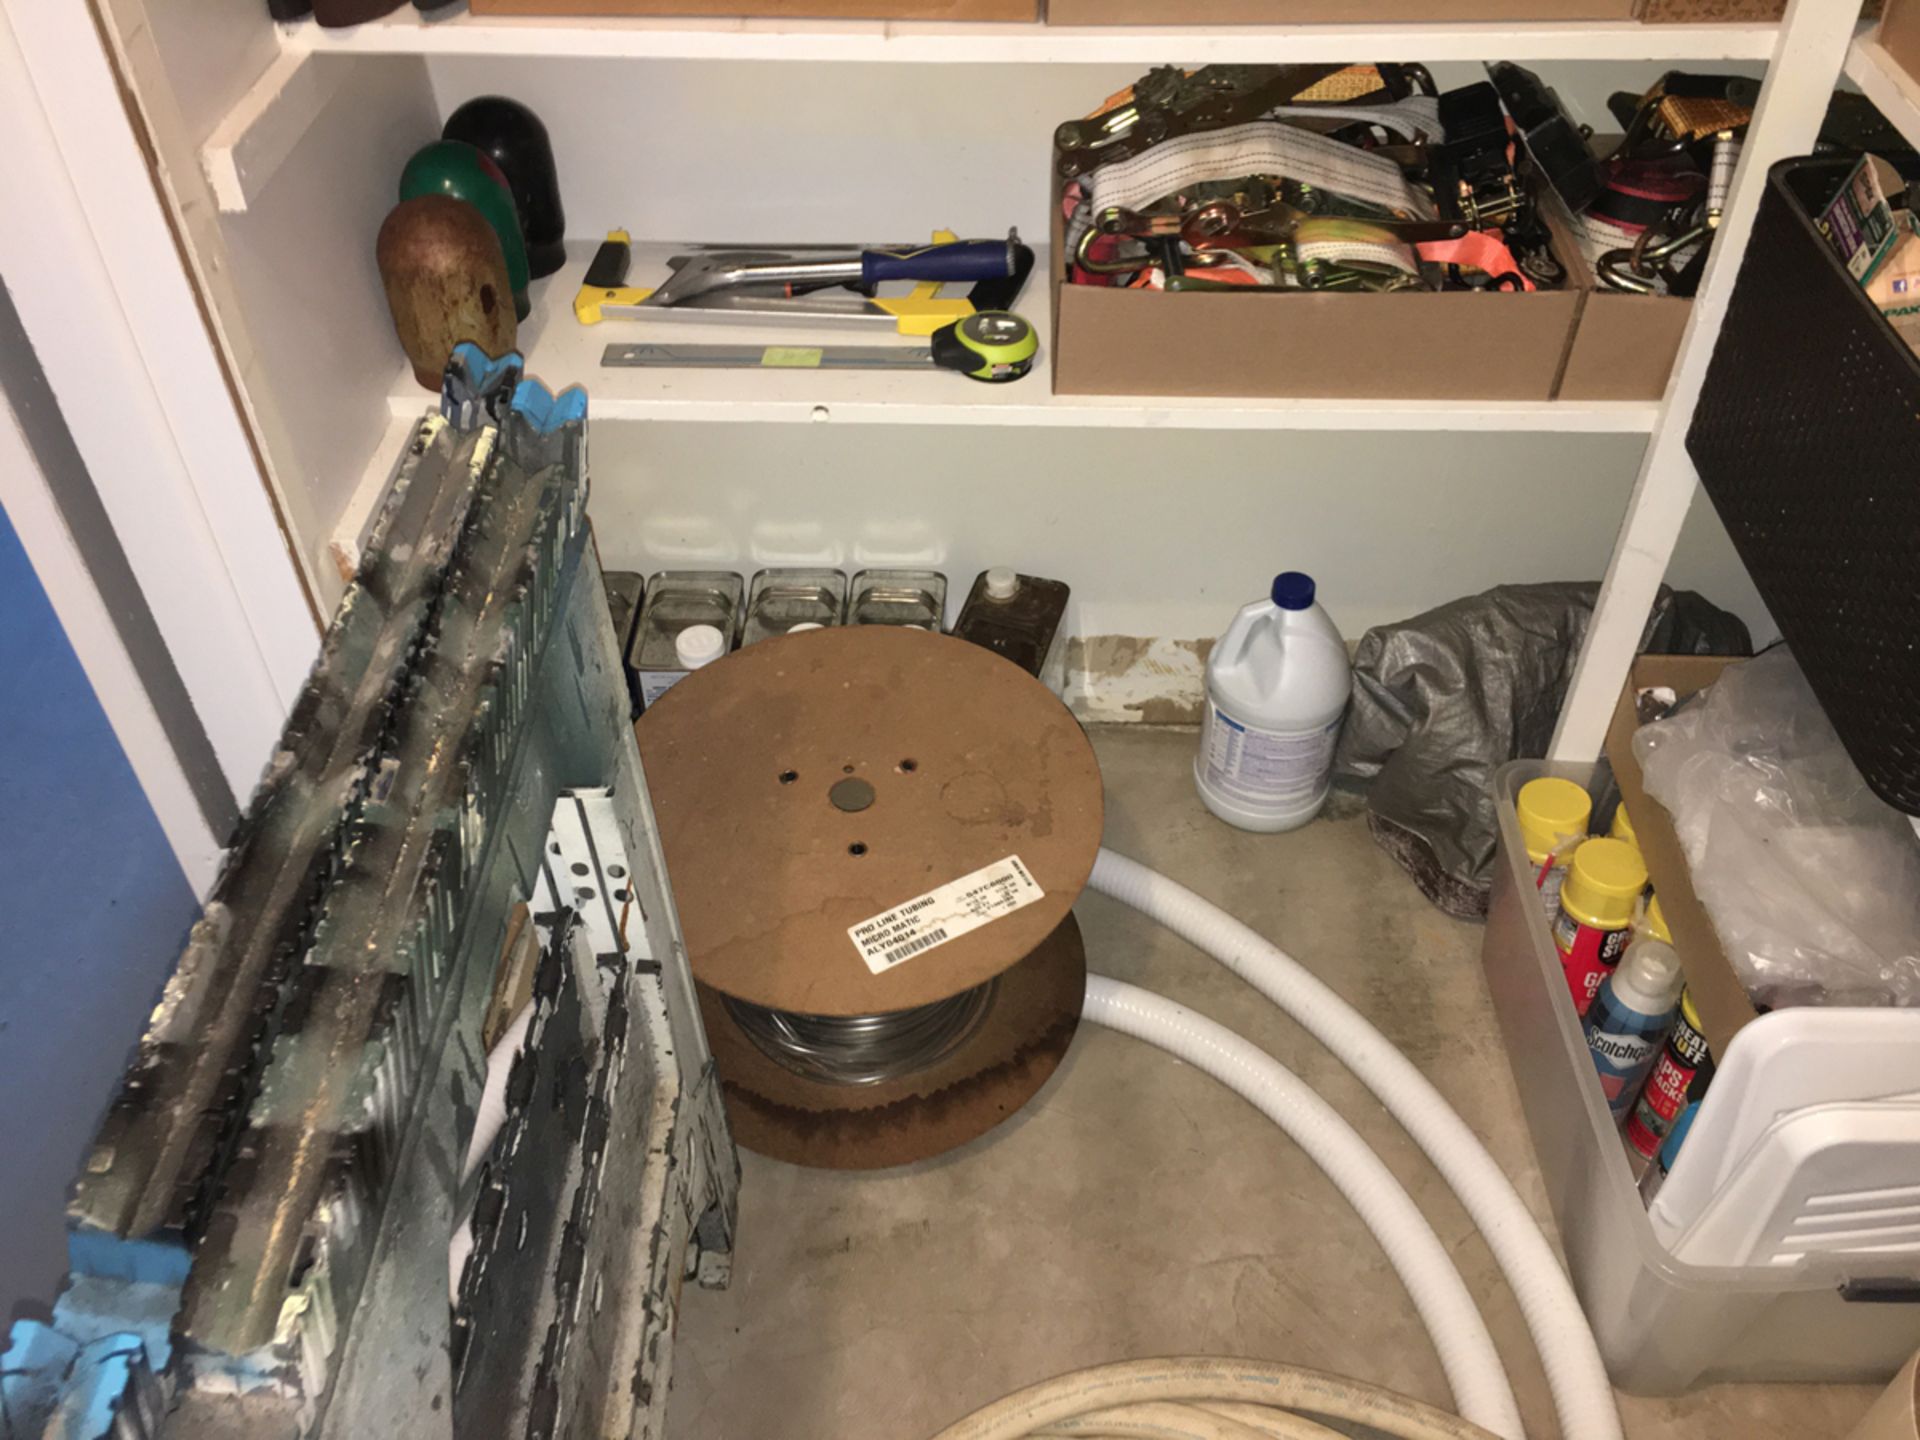 Contents Of Parts And Spares Room - Image 16 of 16